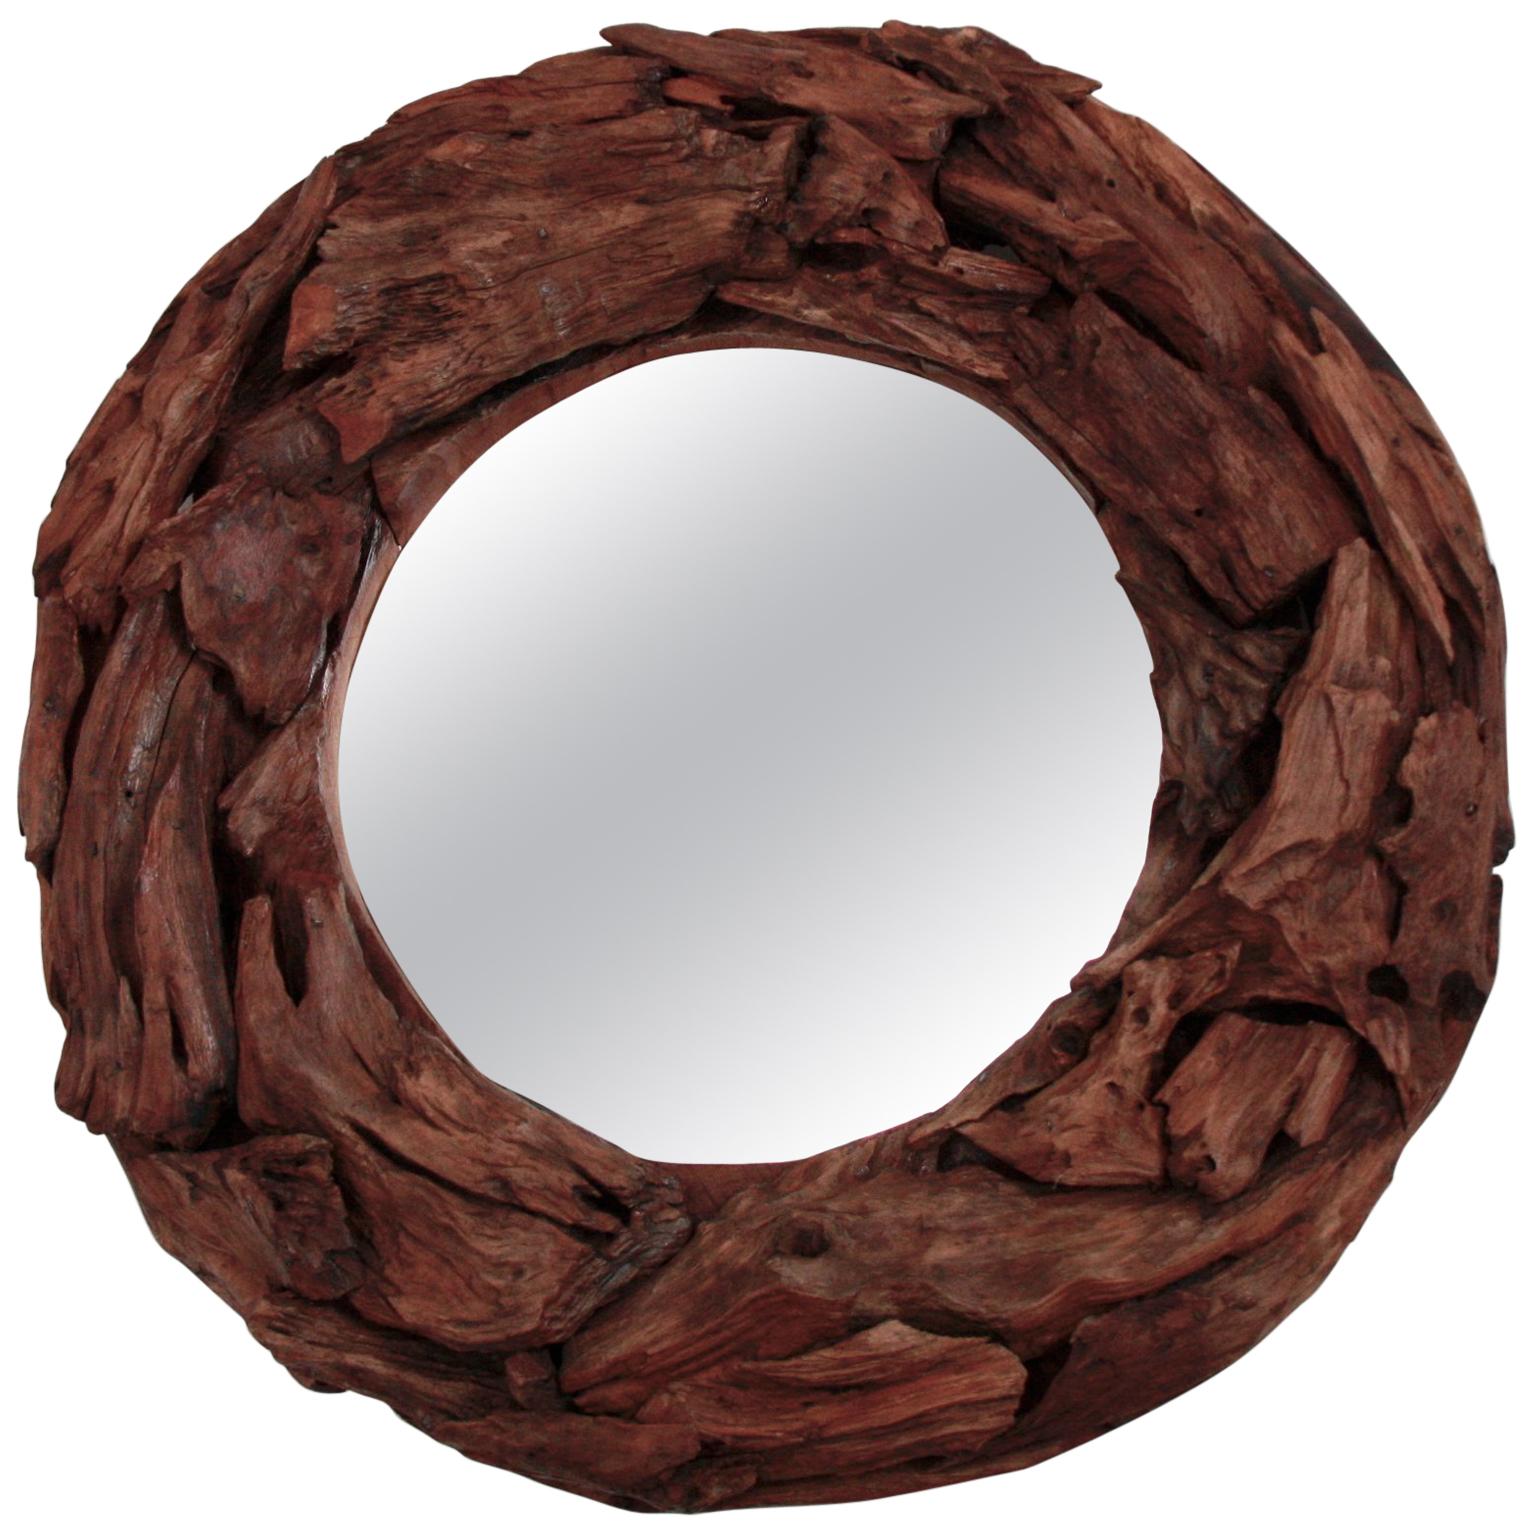 Vintage Italian Round Mirror in Floating Wood, circa 1960 For Sale